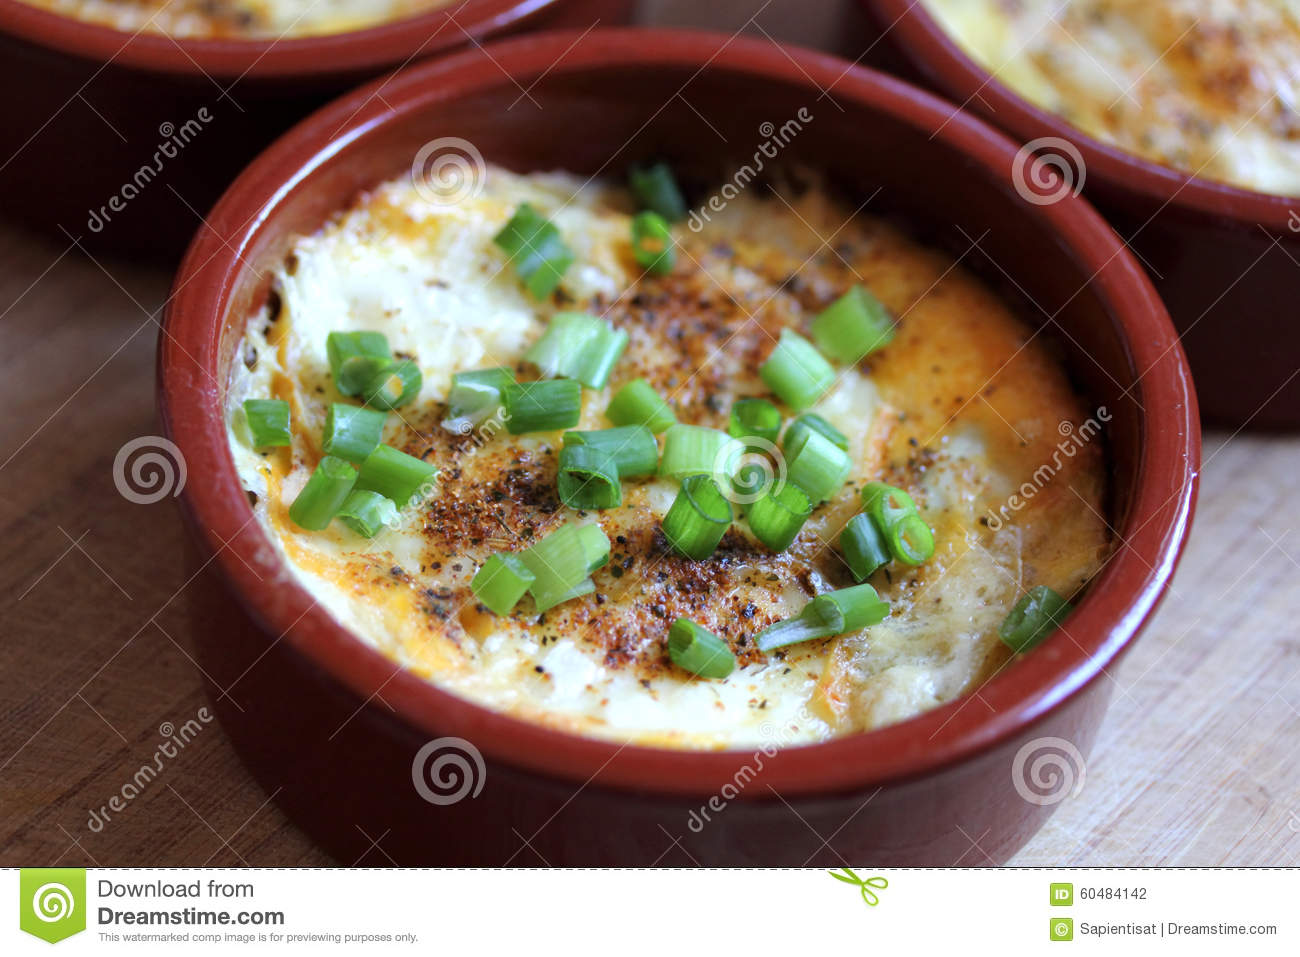 Potato Gratin Baked In A Small Ceramic Dish With A Rustic Setting.